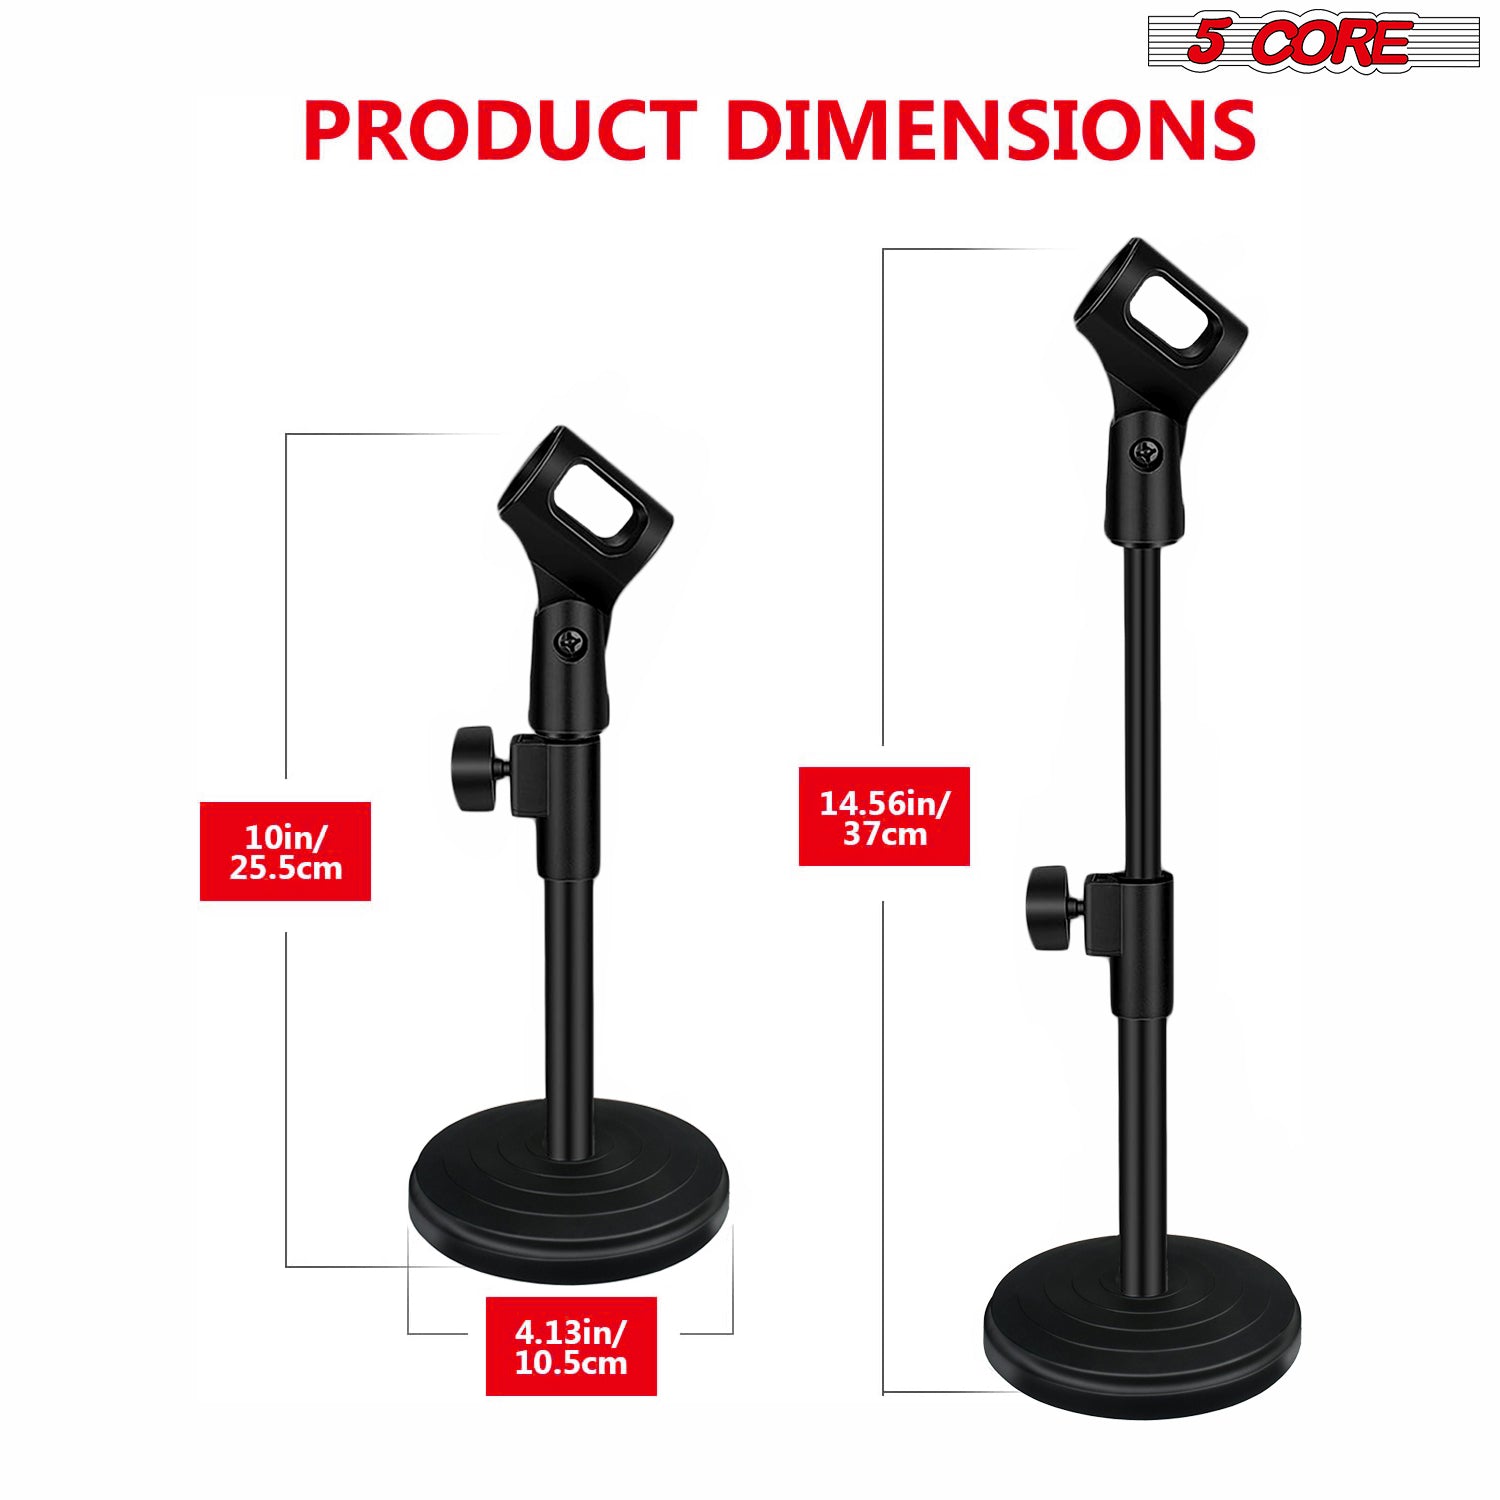 5 Core Desk Microphone Stand Heigh Adjustable